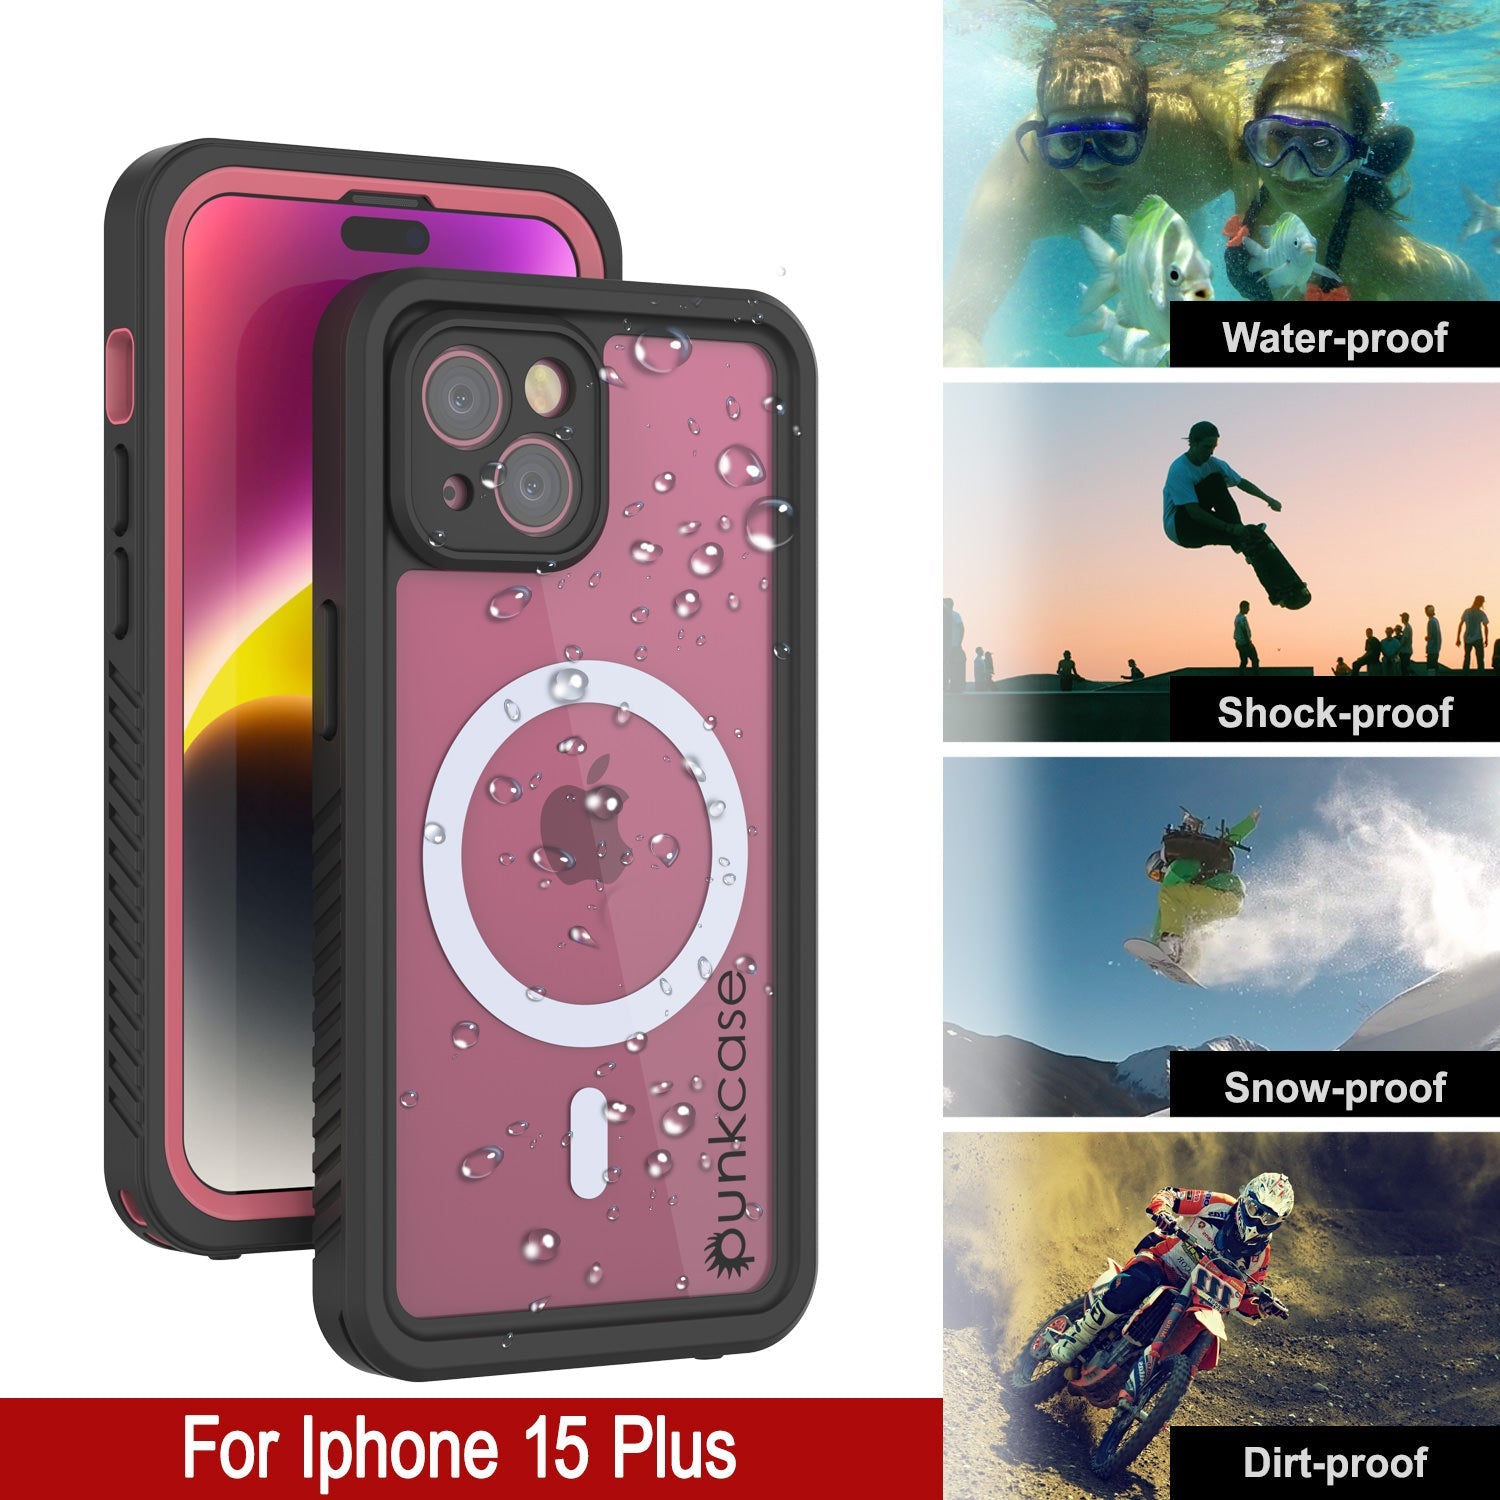 iPhone 15 Plus Waterproof Case, Punkcase [Extreme Series] Armor Cover W/ Built In Screen Protector [Navy Blue]